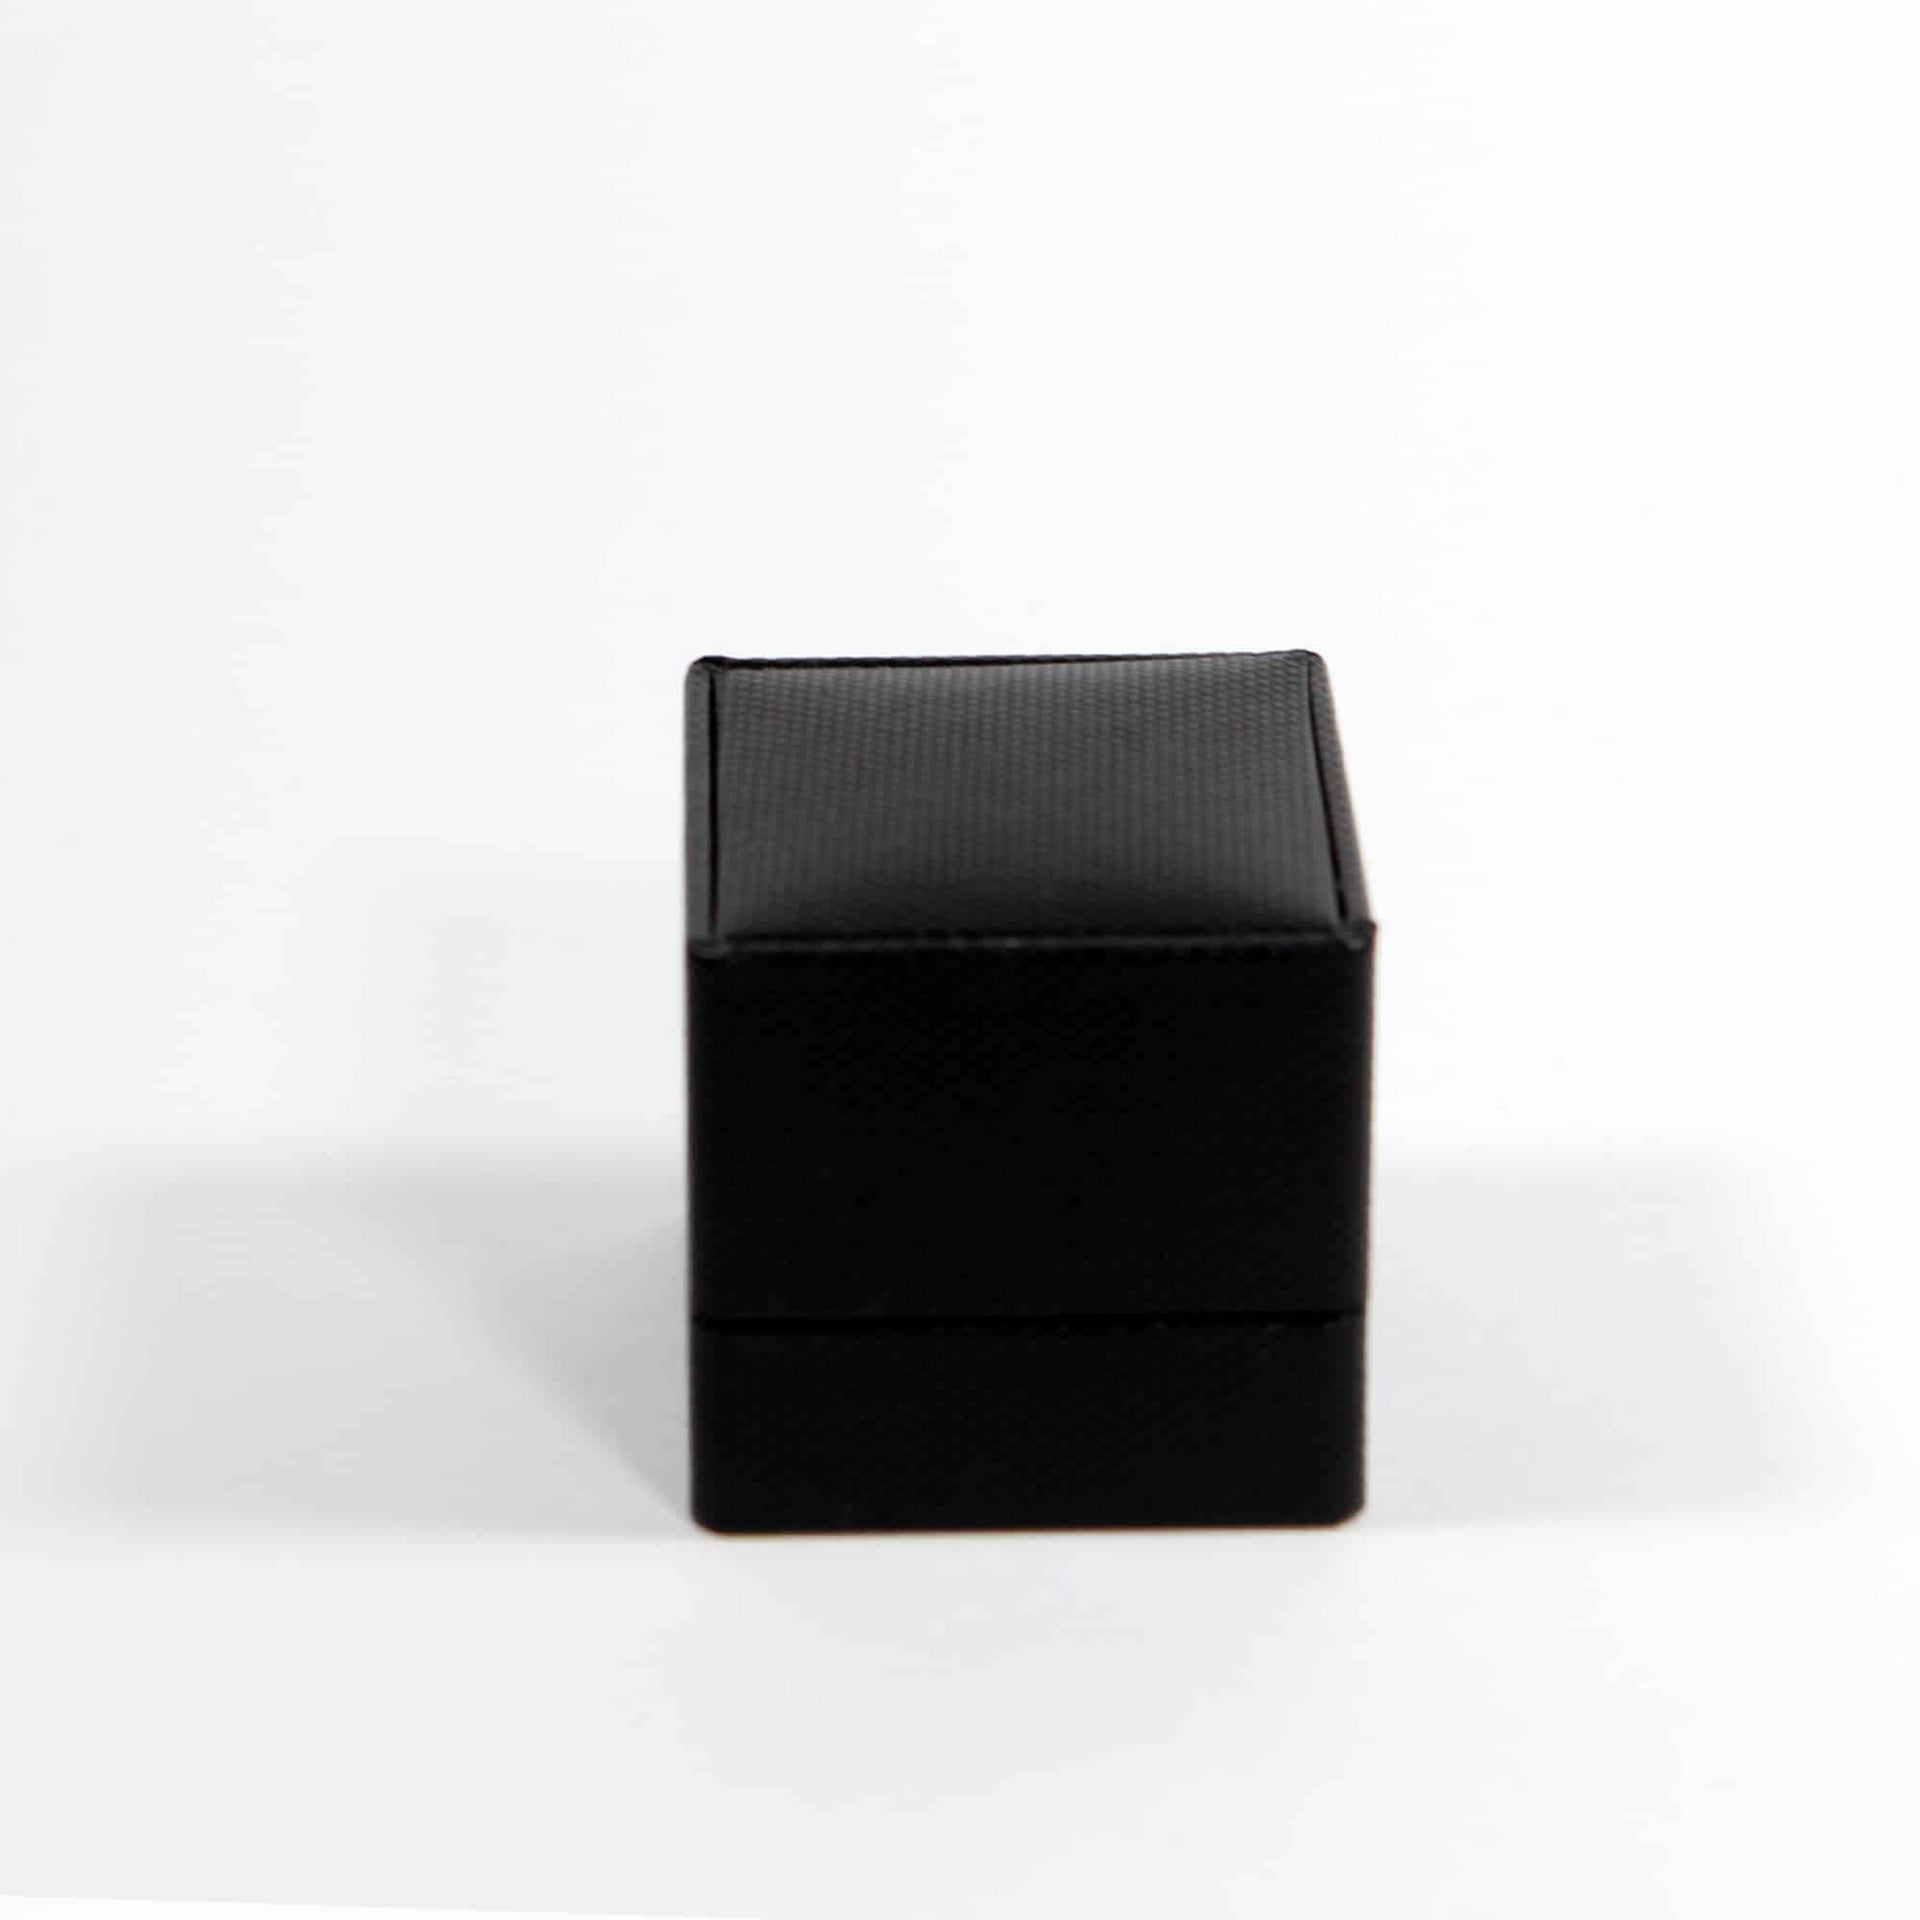 This is a modern black ring box that has a built in led light pointed down at the ring. Great for weddings, proposals, ,engagements or just to show off your gems! Comes gift ready with a gift box.. .